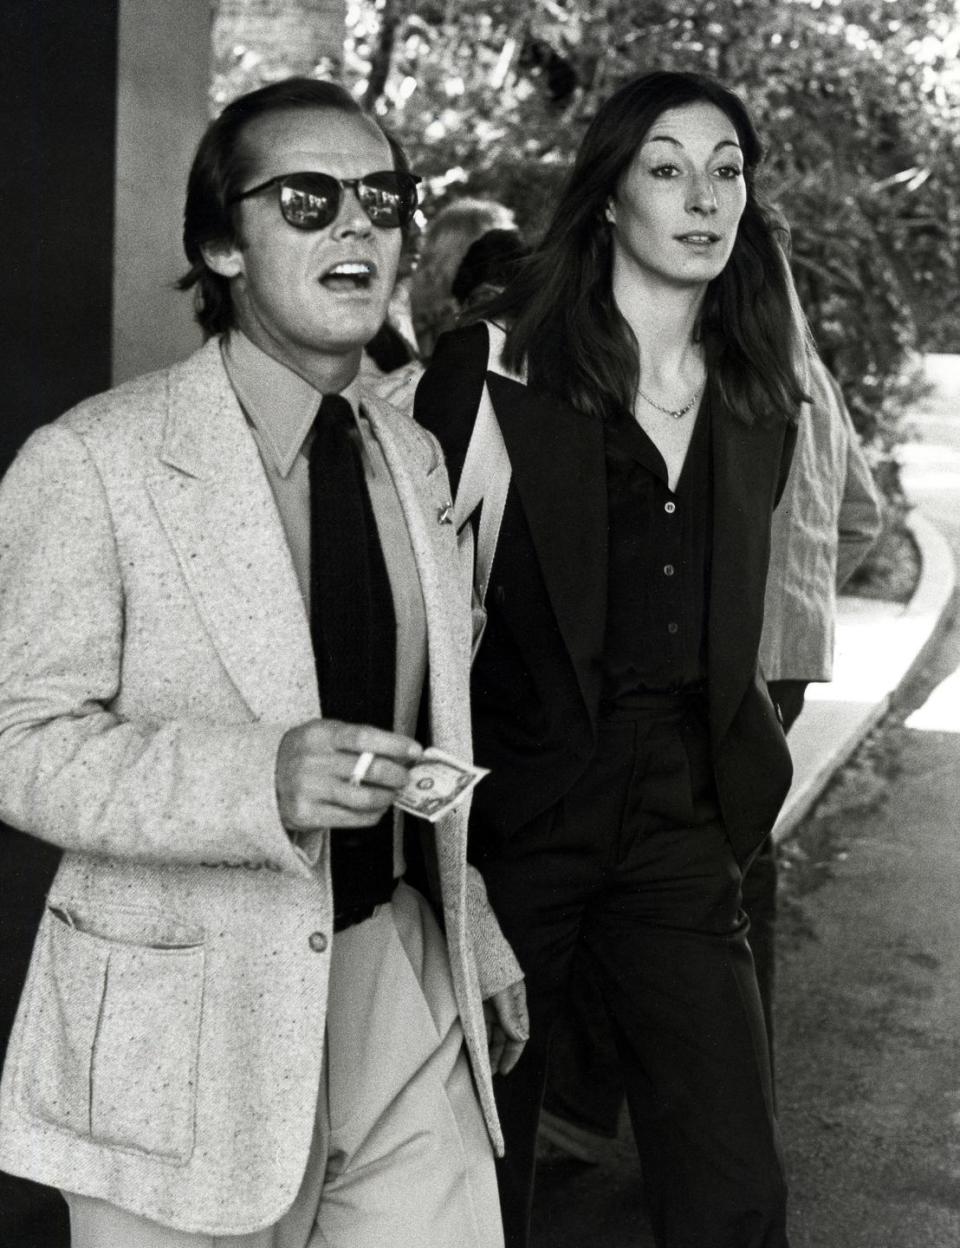 30 Photos of Jack Nicholson Defining Cool in the 1970s